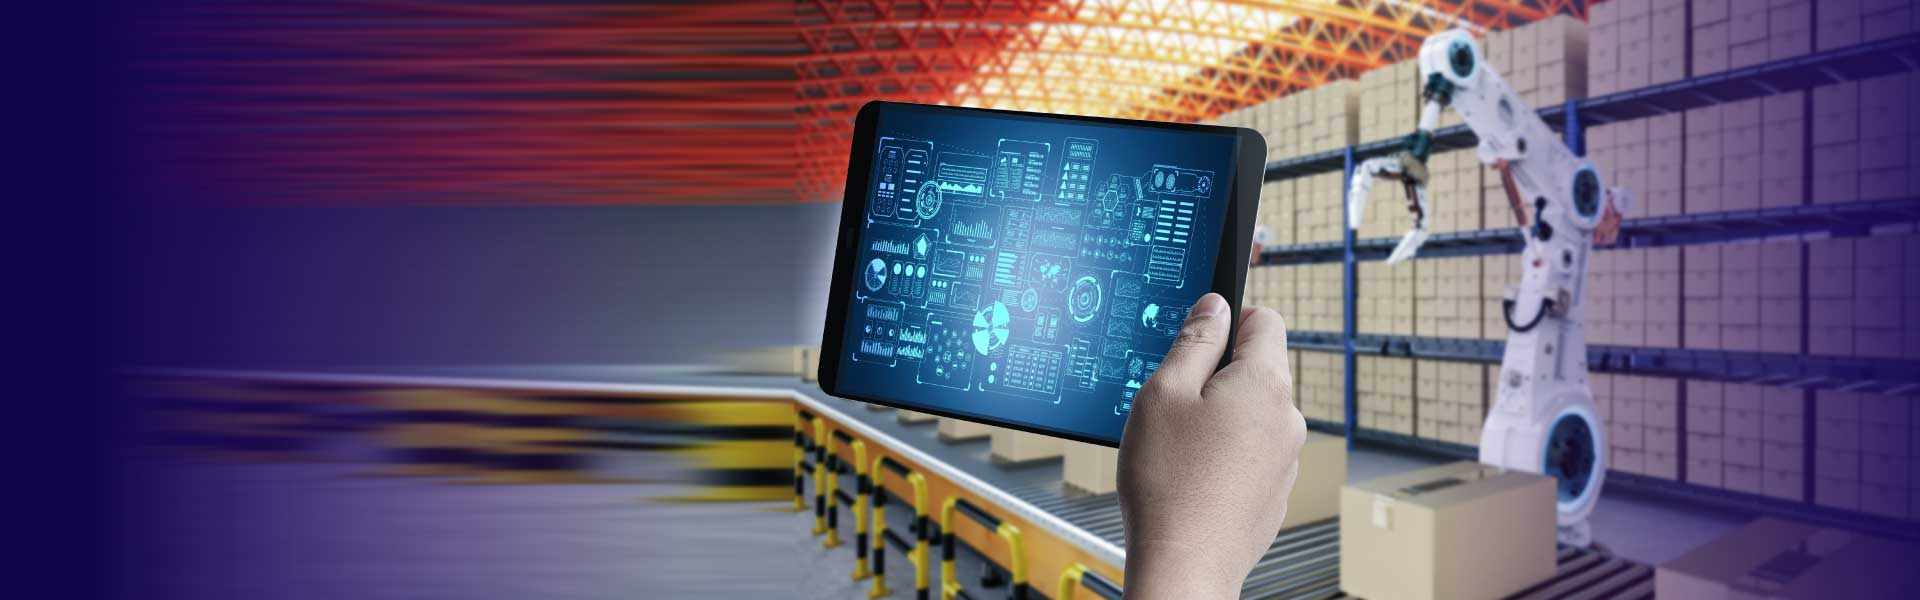 Automation-as-a-Service: The New Horizon in Supply Chain and Logistics Industry